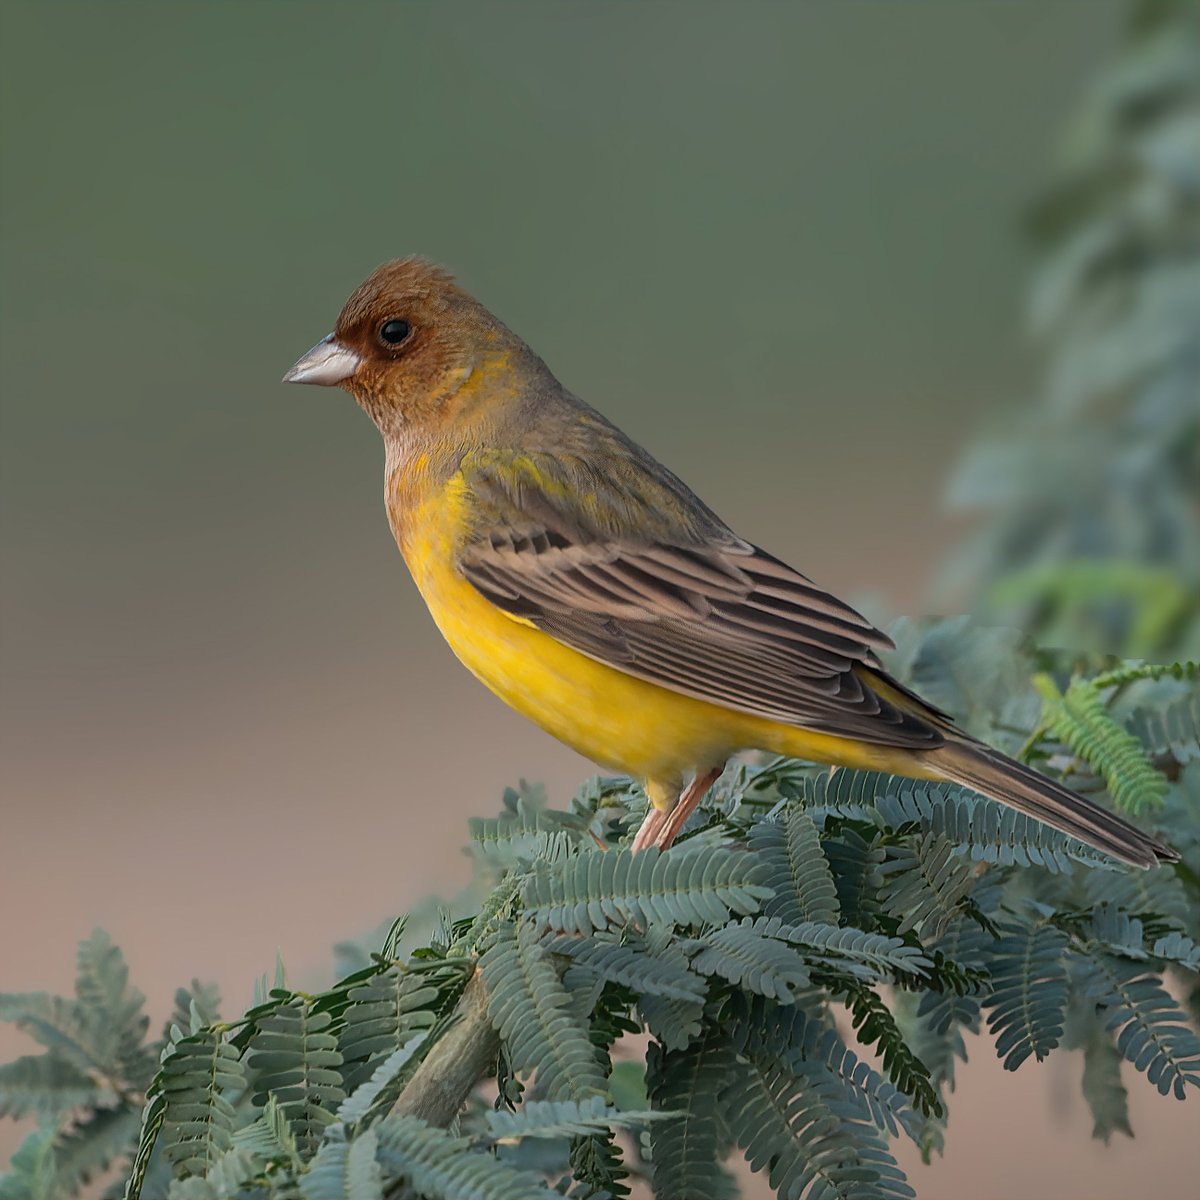 Our today's color theme is 'Yellow' – A color of shines with Optimism, enlightenment and happiness. Do share your pictures / Video with ‘YELLOW’ color. Most liked pic in comment section will be reposted by end of the day. Red-headed Bunting #ThePhotoHour #IndiAves #birds